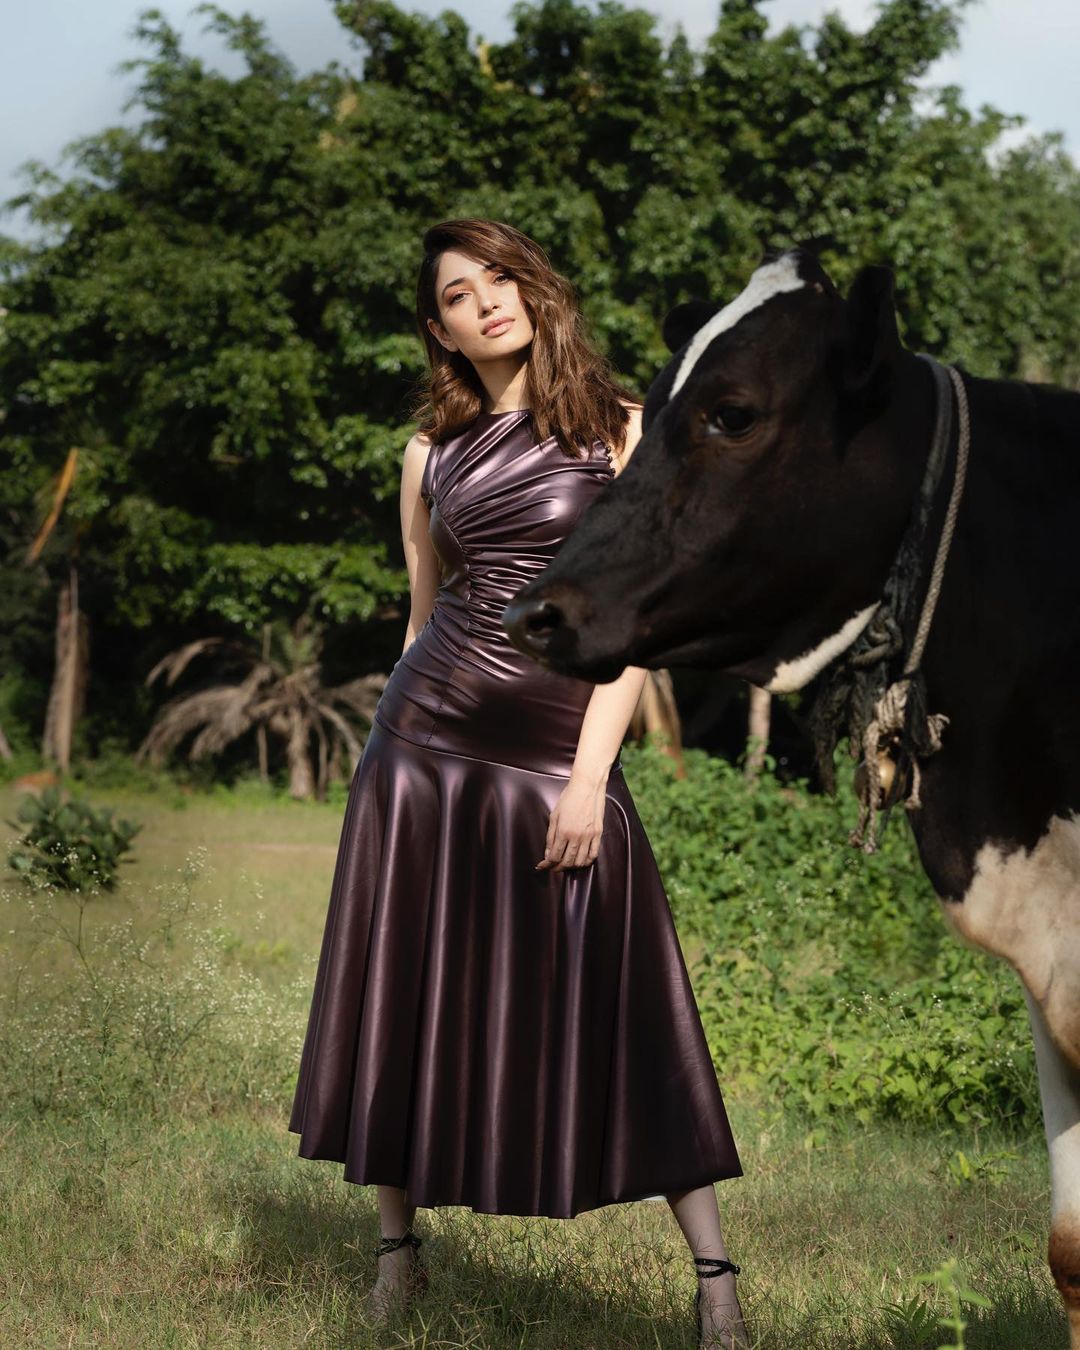 Giving Tamannaah company in the outdoor shoot is a cow. 